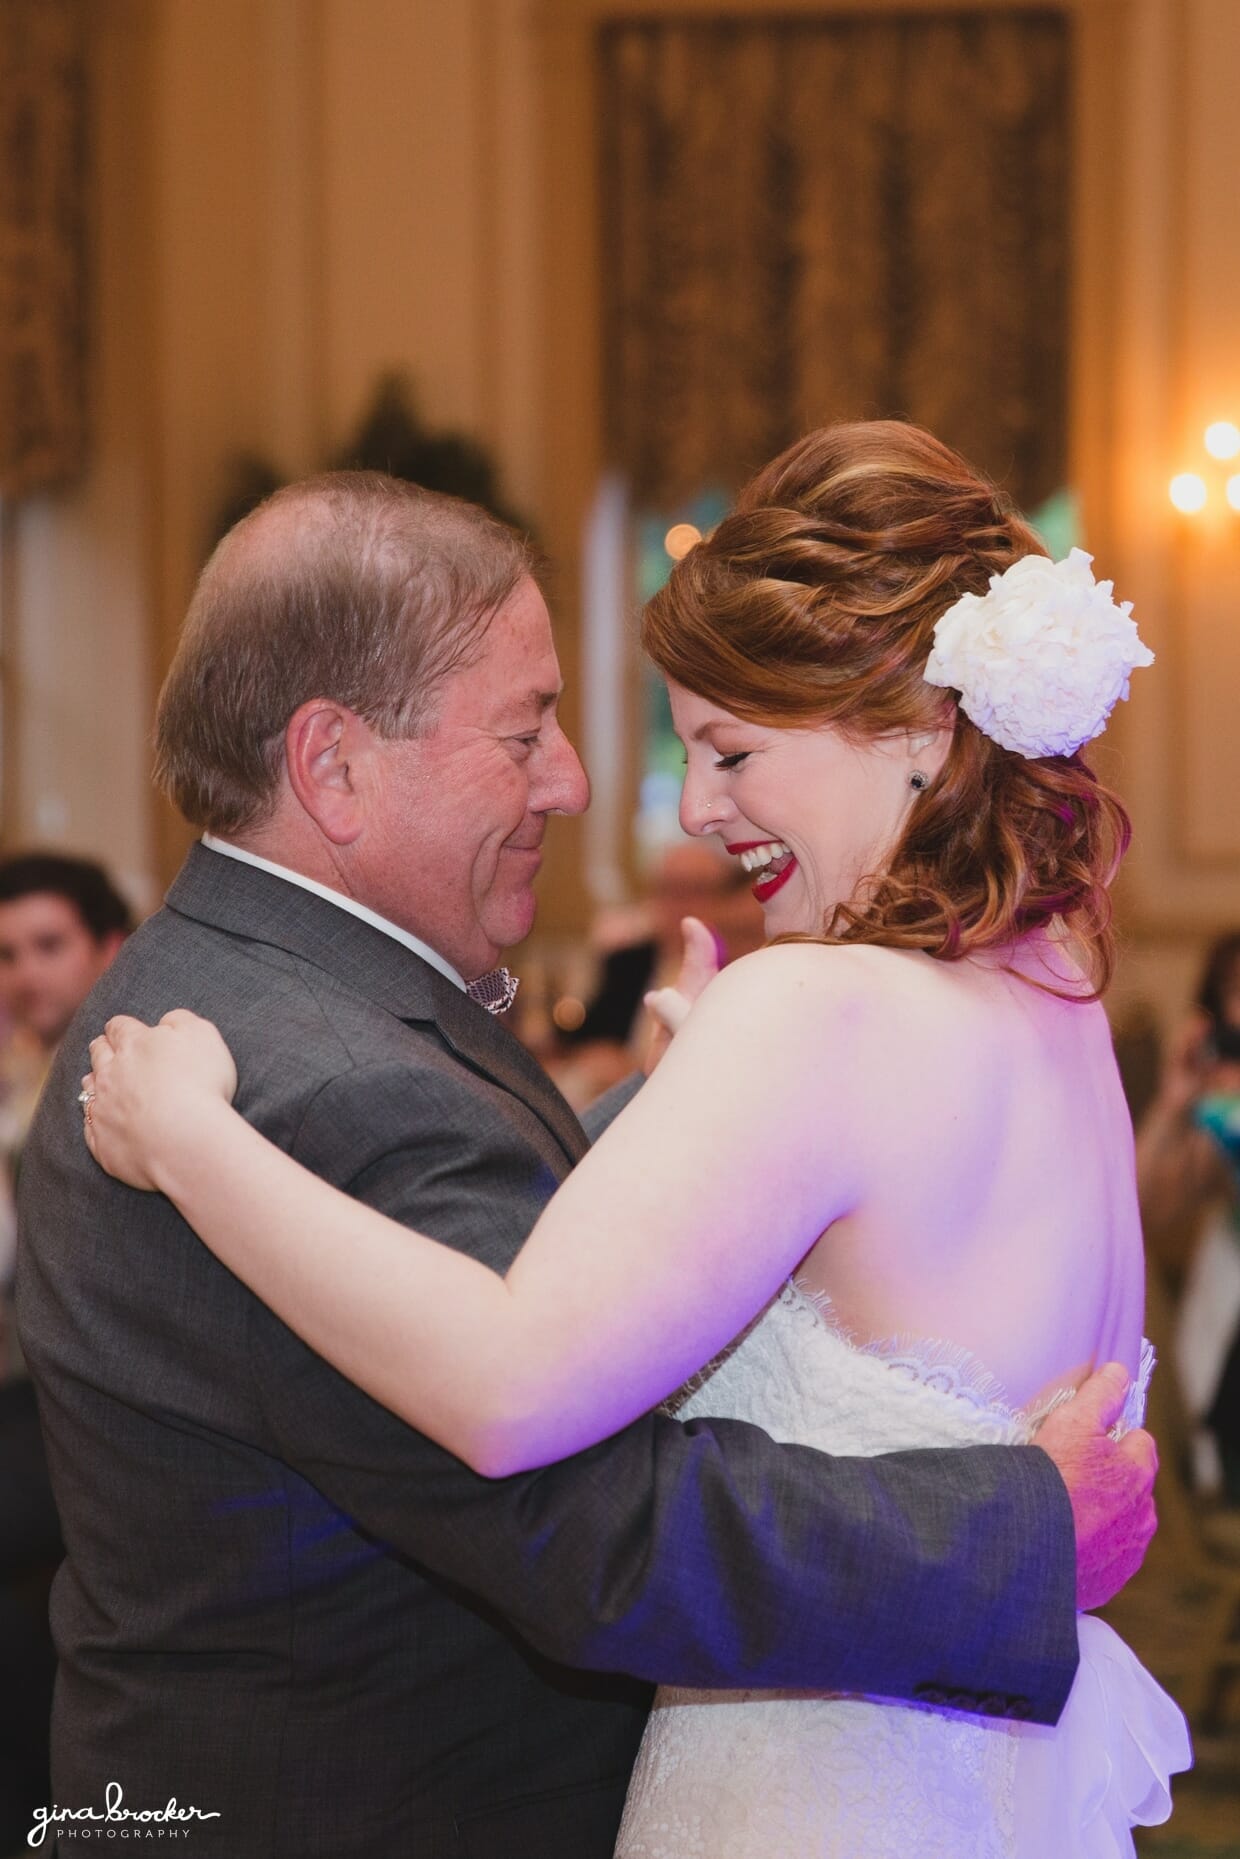 A sweet moment captured during the father daughter dance at a wedding in the Hawthorne Hotel in Salem Massachusetts